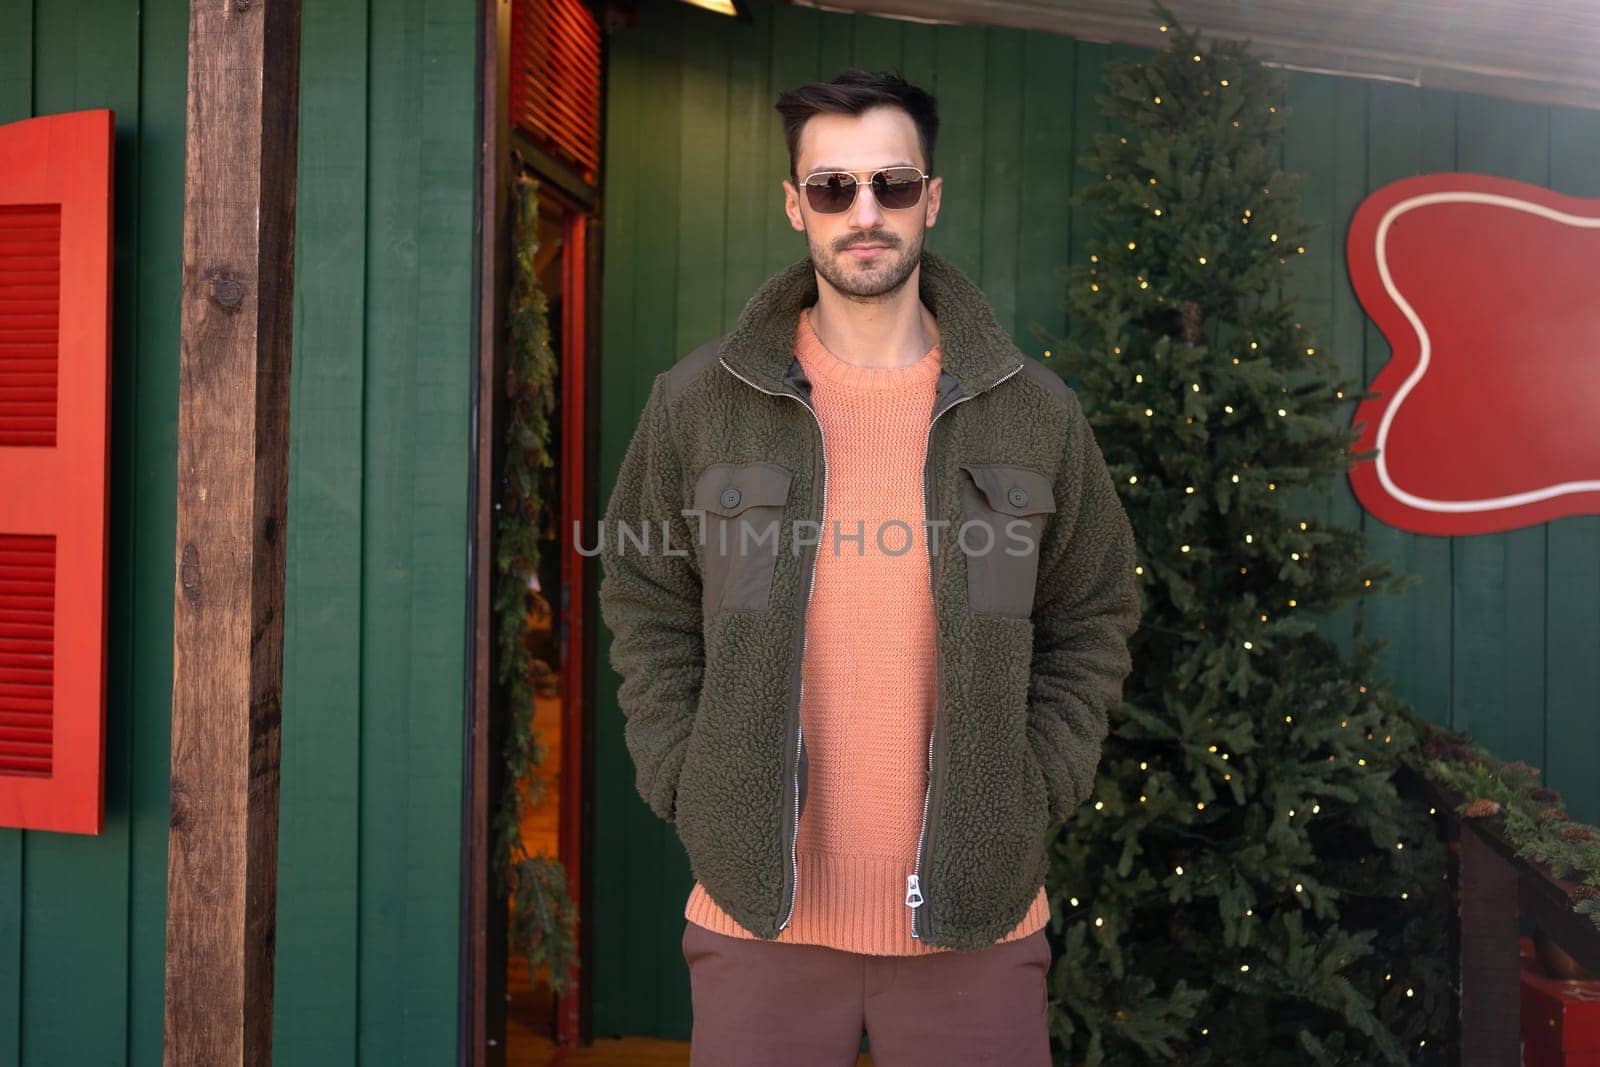 Man wear sunglasses standing near Christmas tree. Young male with trendy hairstyle wearing green jacket and pink shirt stands on street near storefront with bright lights